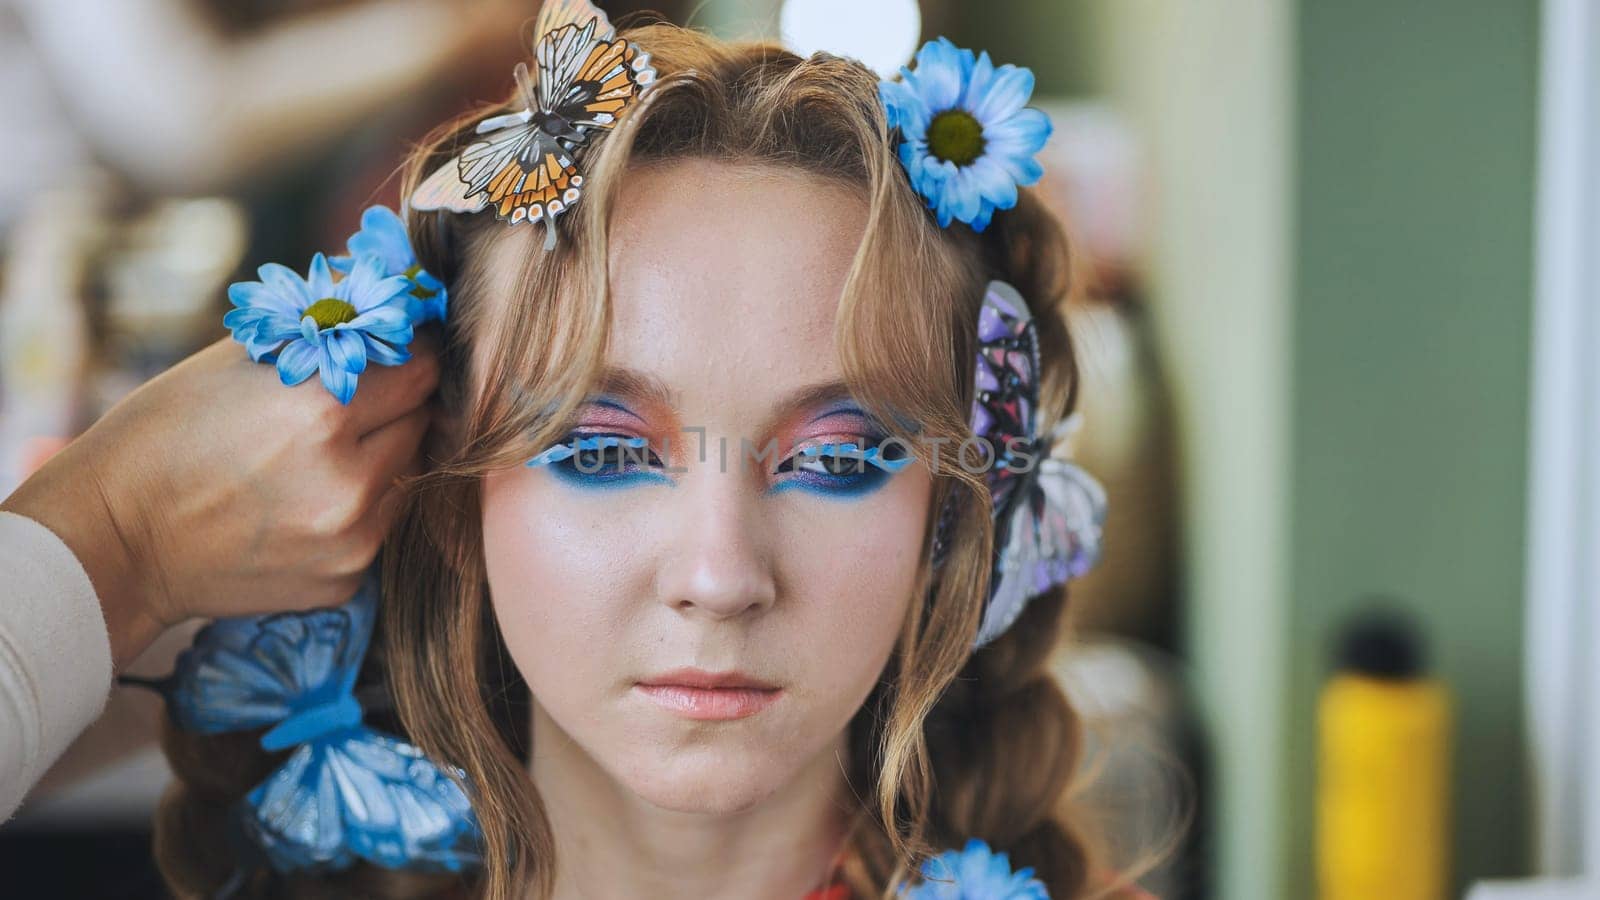 The hairdresser decorates the model's hair with blue flowers and butterflies. by DovidPro